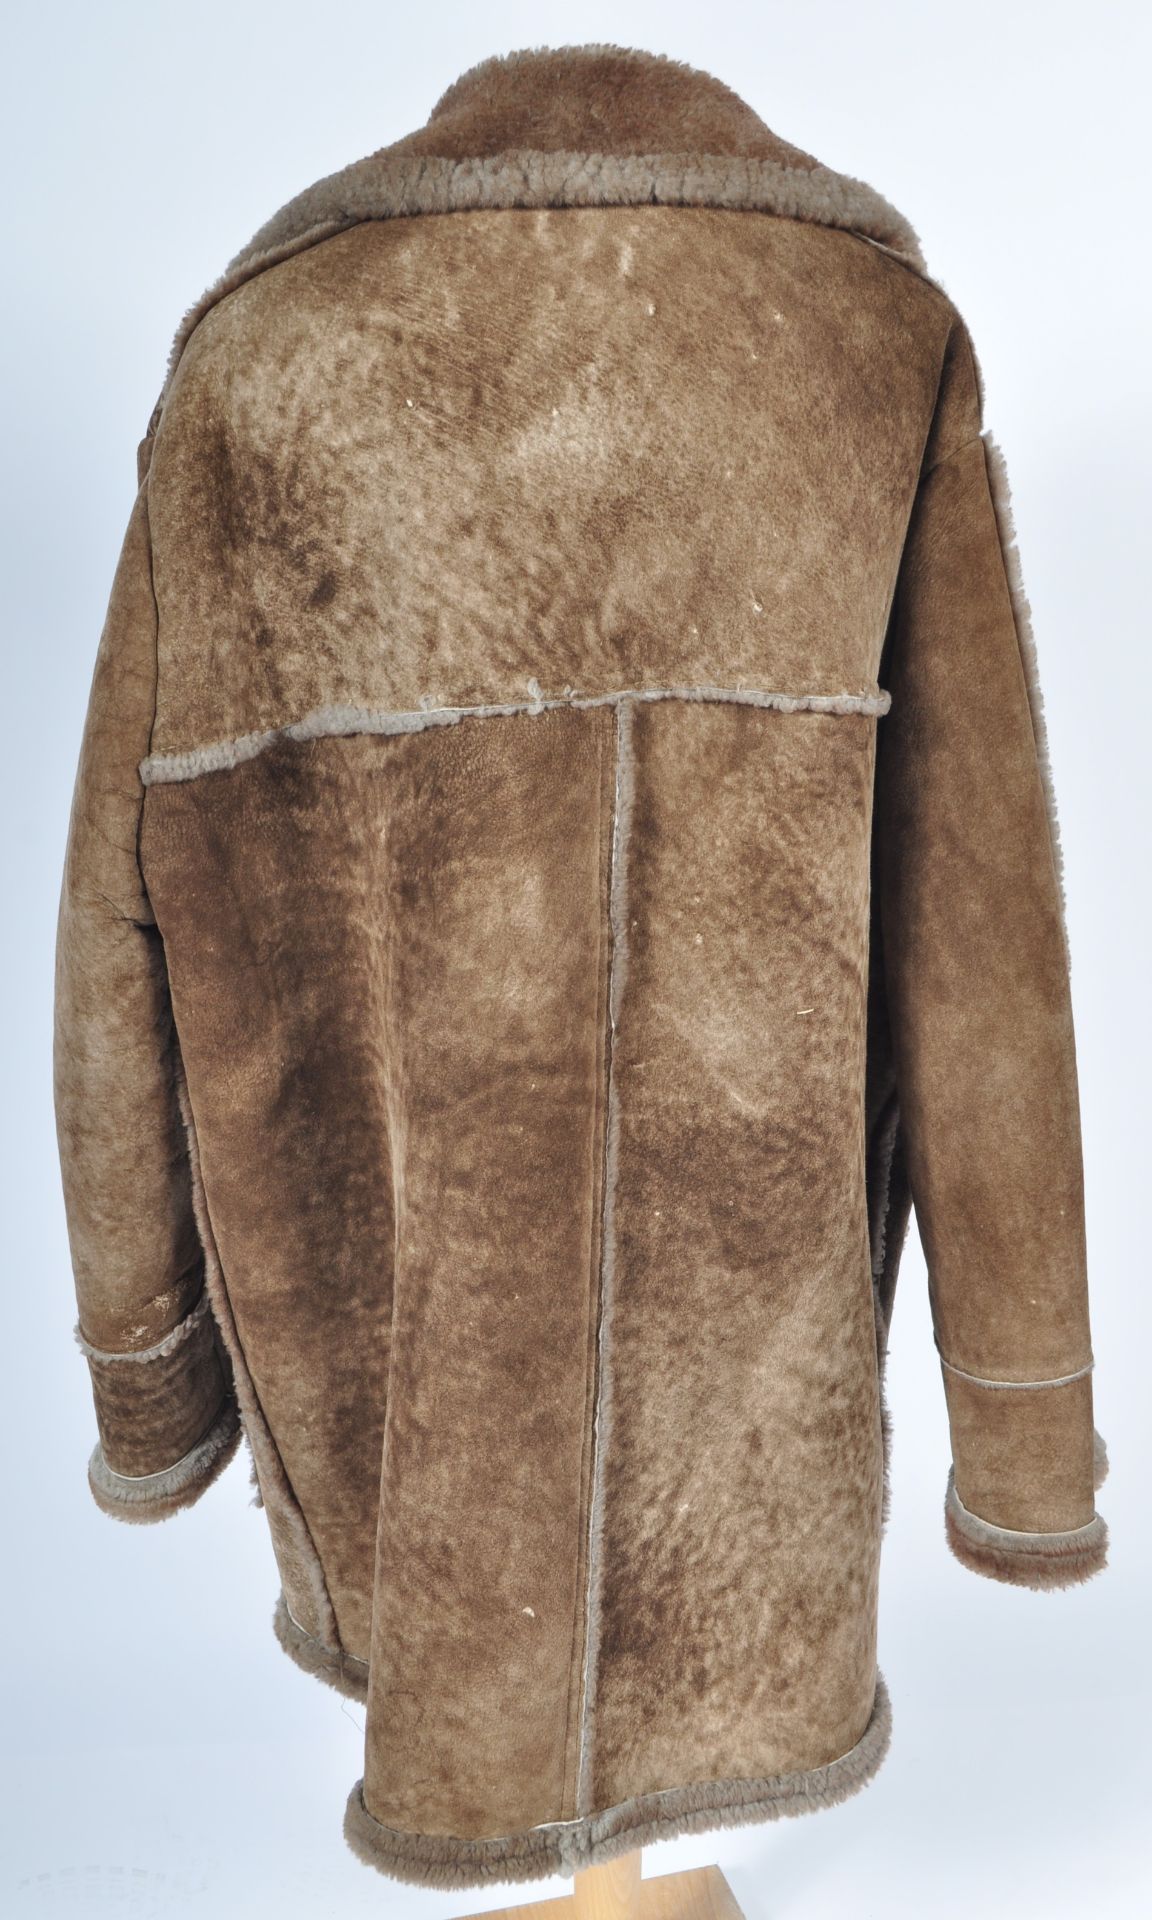 ESTATE OF DAVE PROWSE - 1970S SHEEPSKIN COAT AS WORN BY MR PROWSE - Image 4 of 7